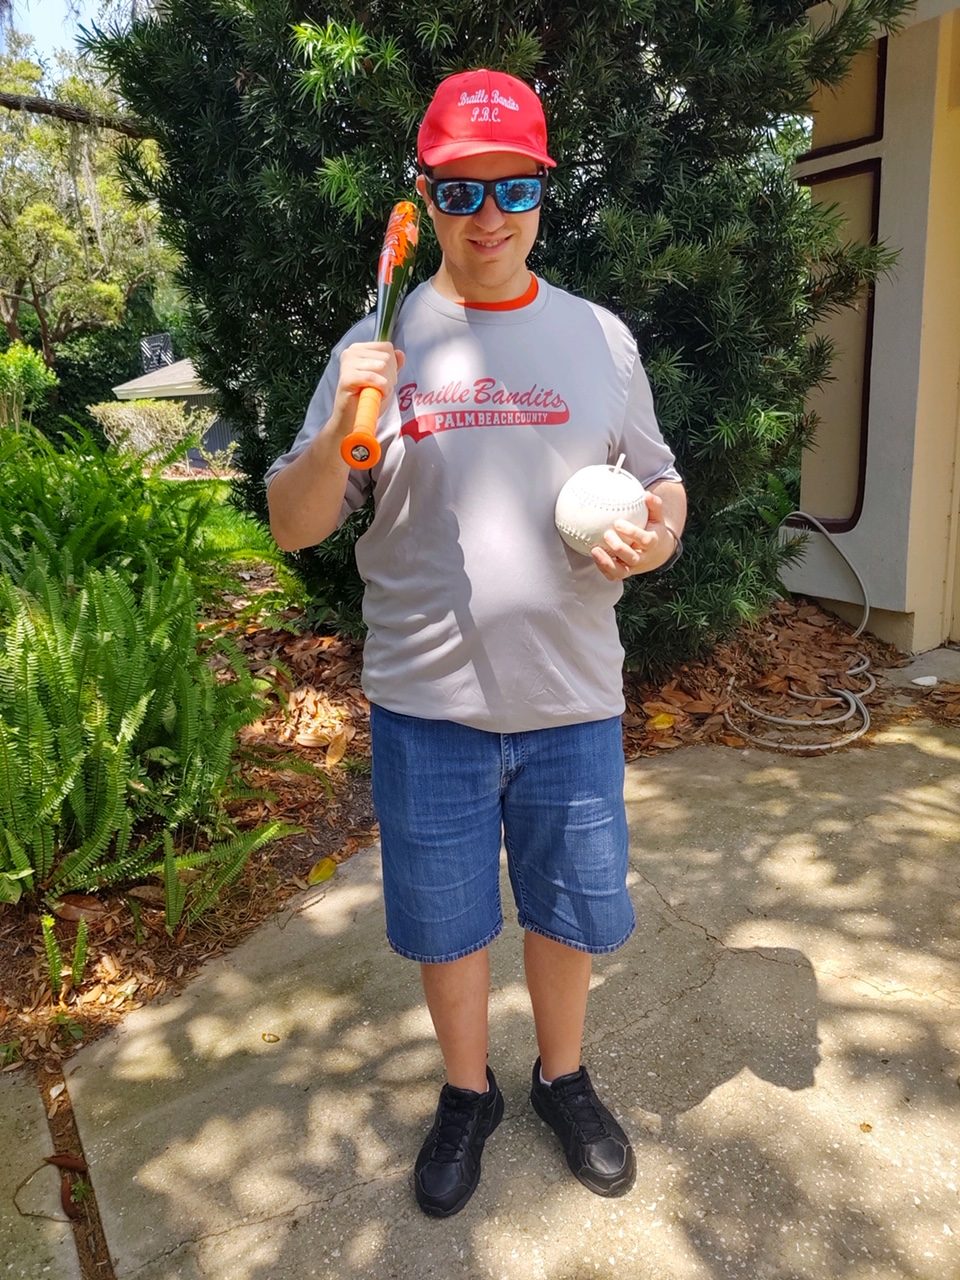 Greg holding a beep baseball and a baseball bat, wears a Braille Bandits jersey and hat to represent the Florida team he plays for.